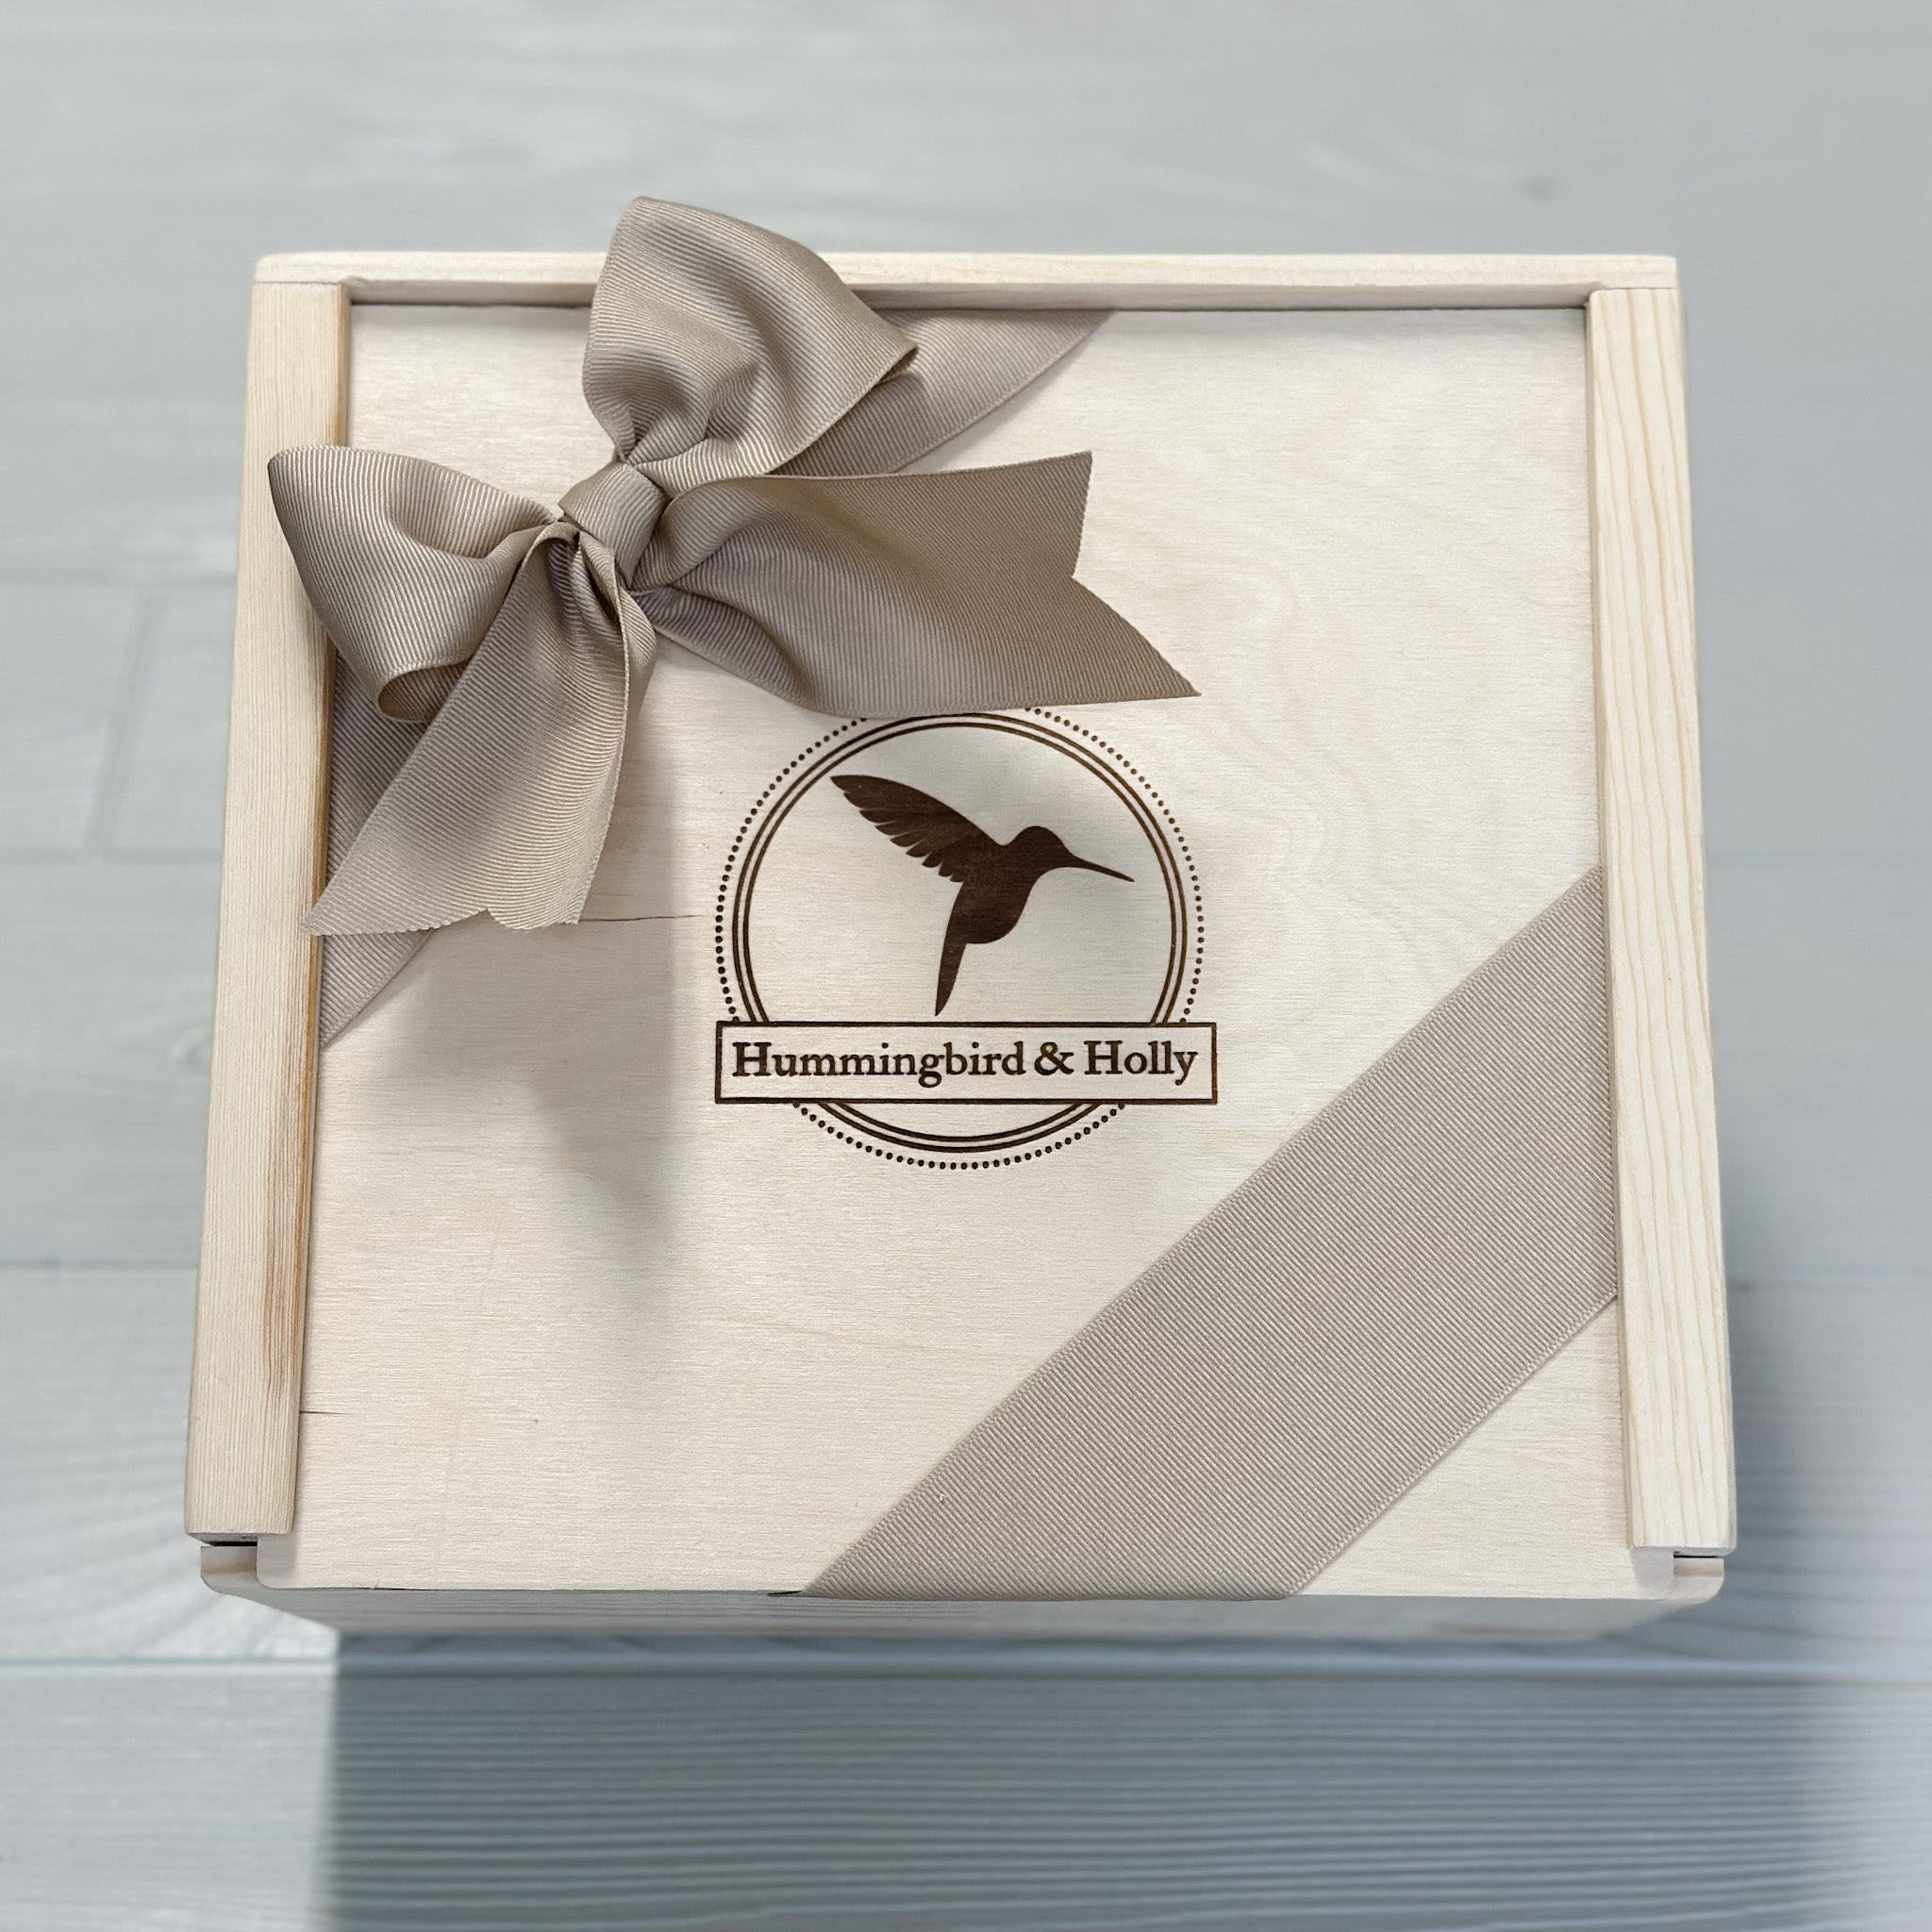 close up of our locally made wooden slide lid box include in our joyous brunch gift basket